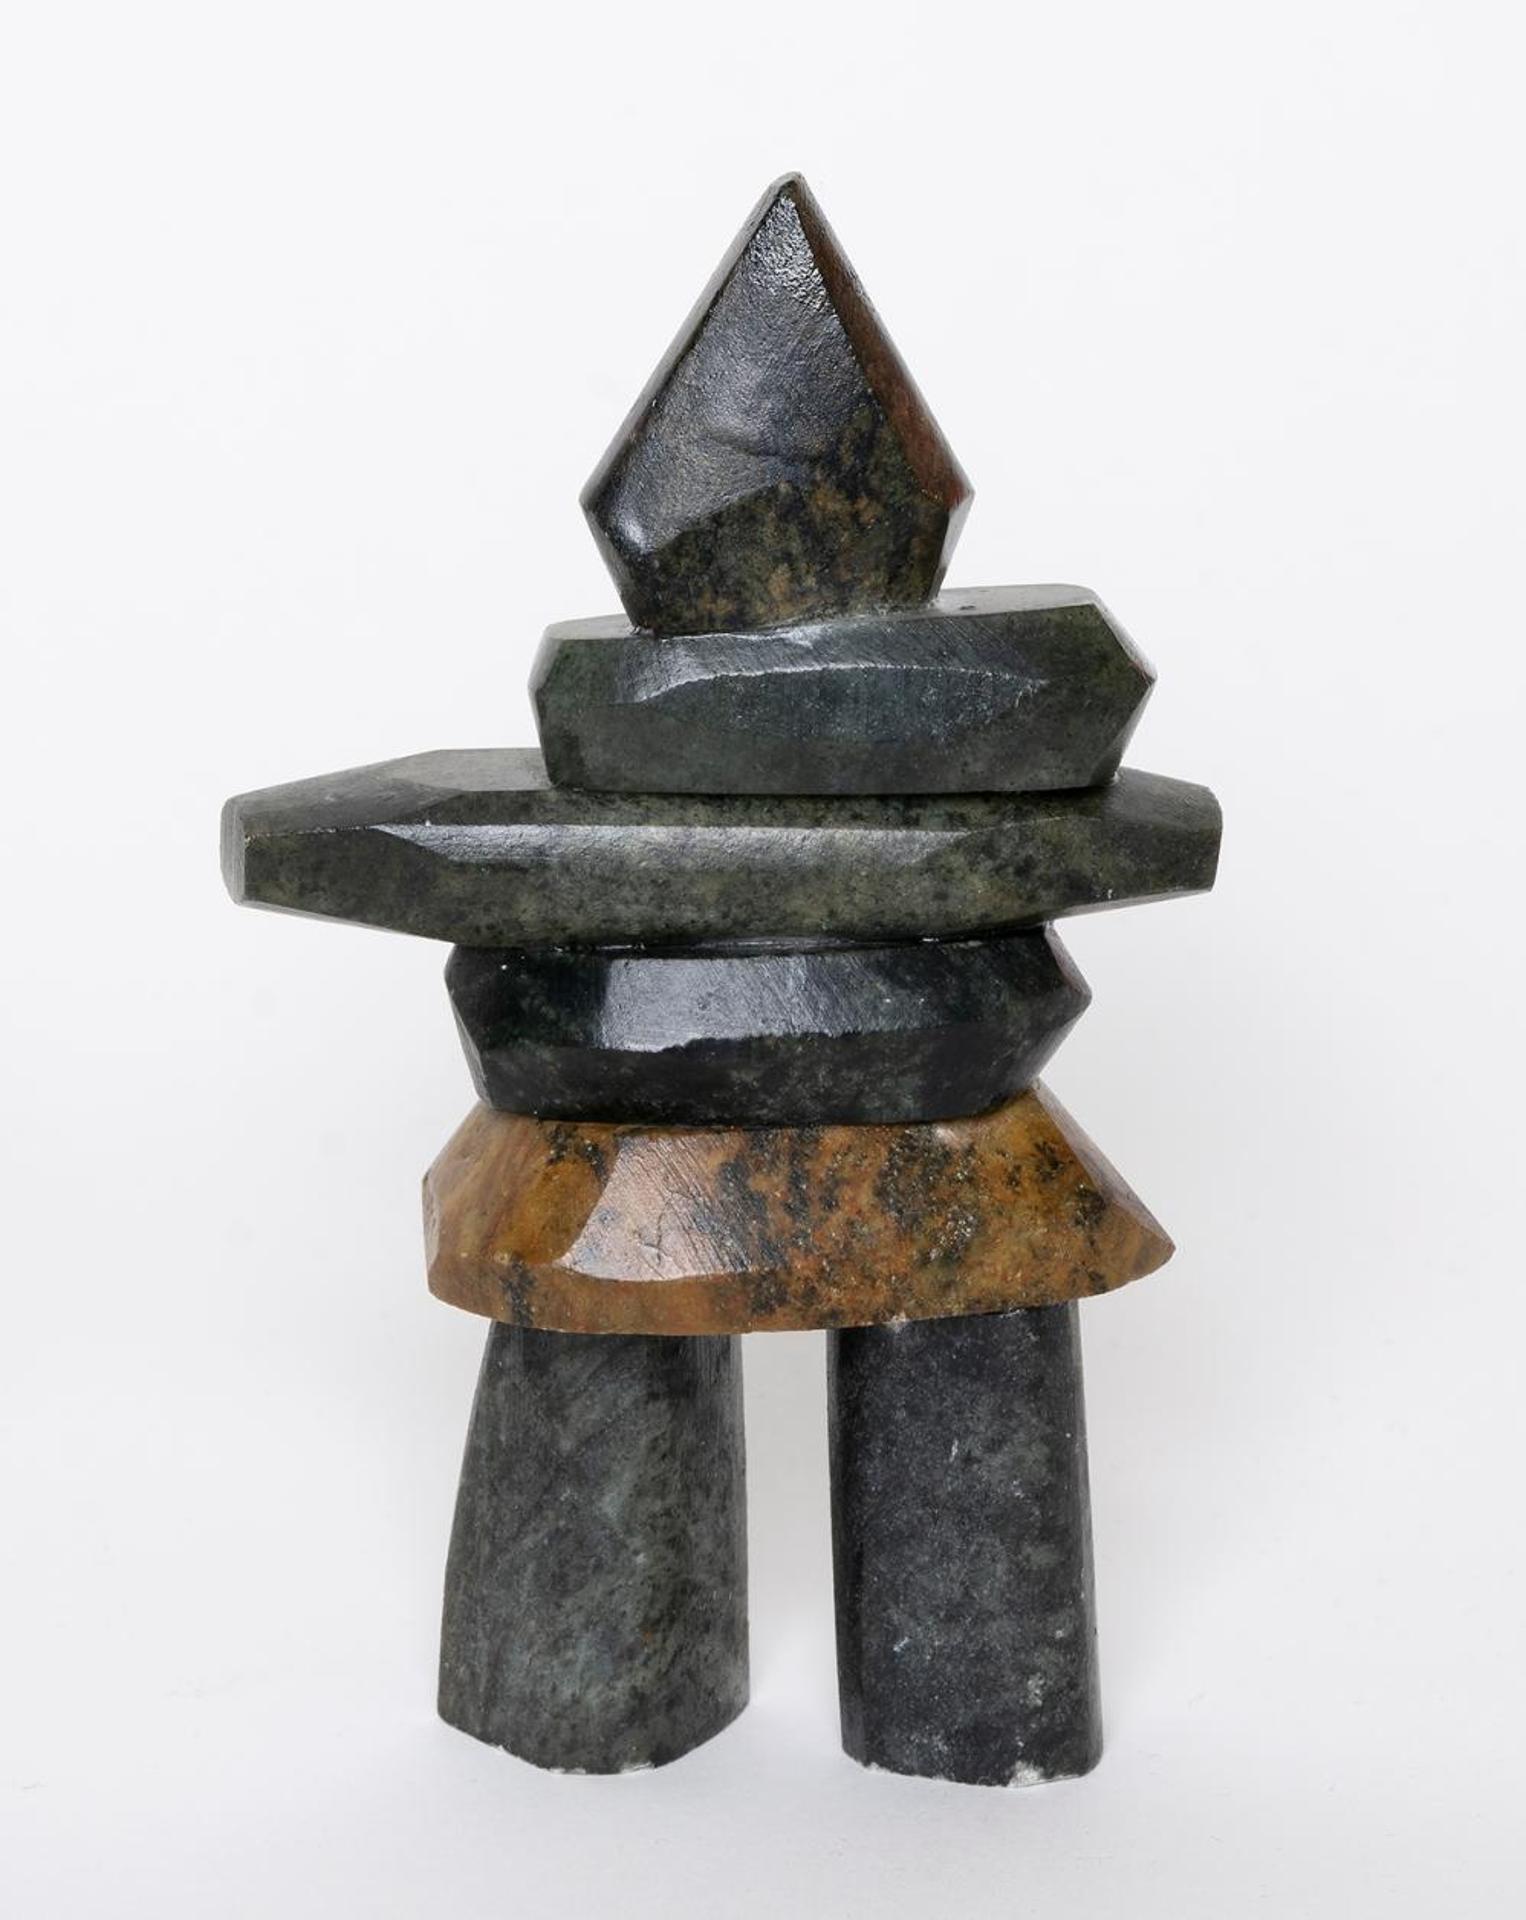 Clivelon Totan (1981-2018) - Small Inukshuk with Light Centre